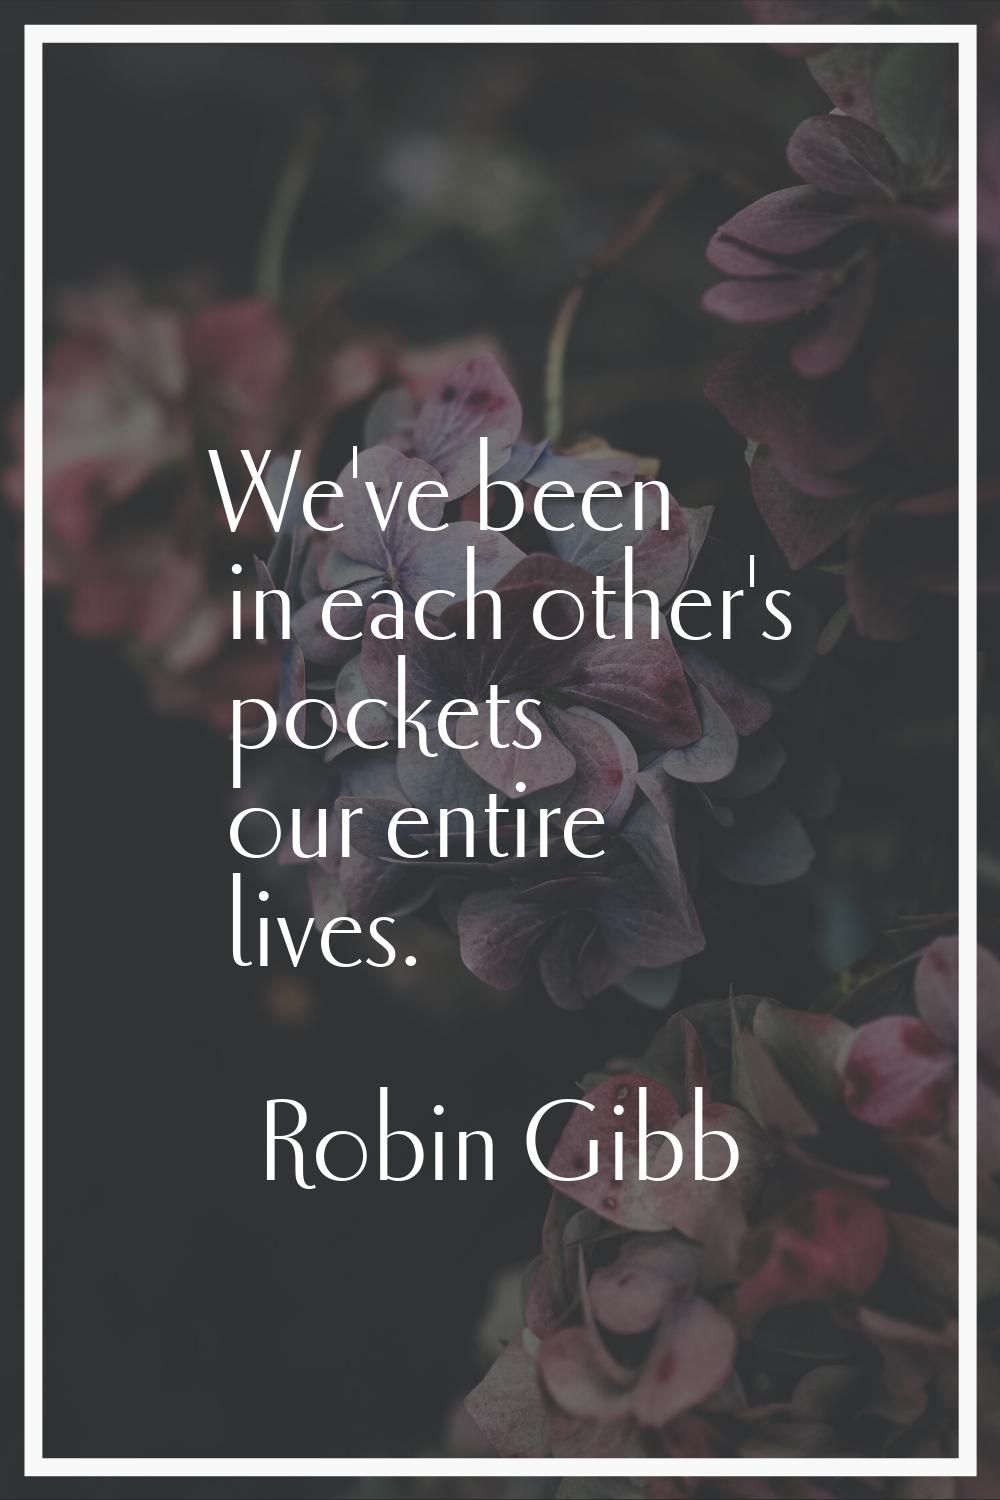 We've been in each other's pockets our entire lives.